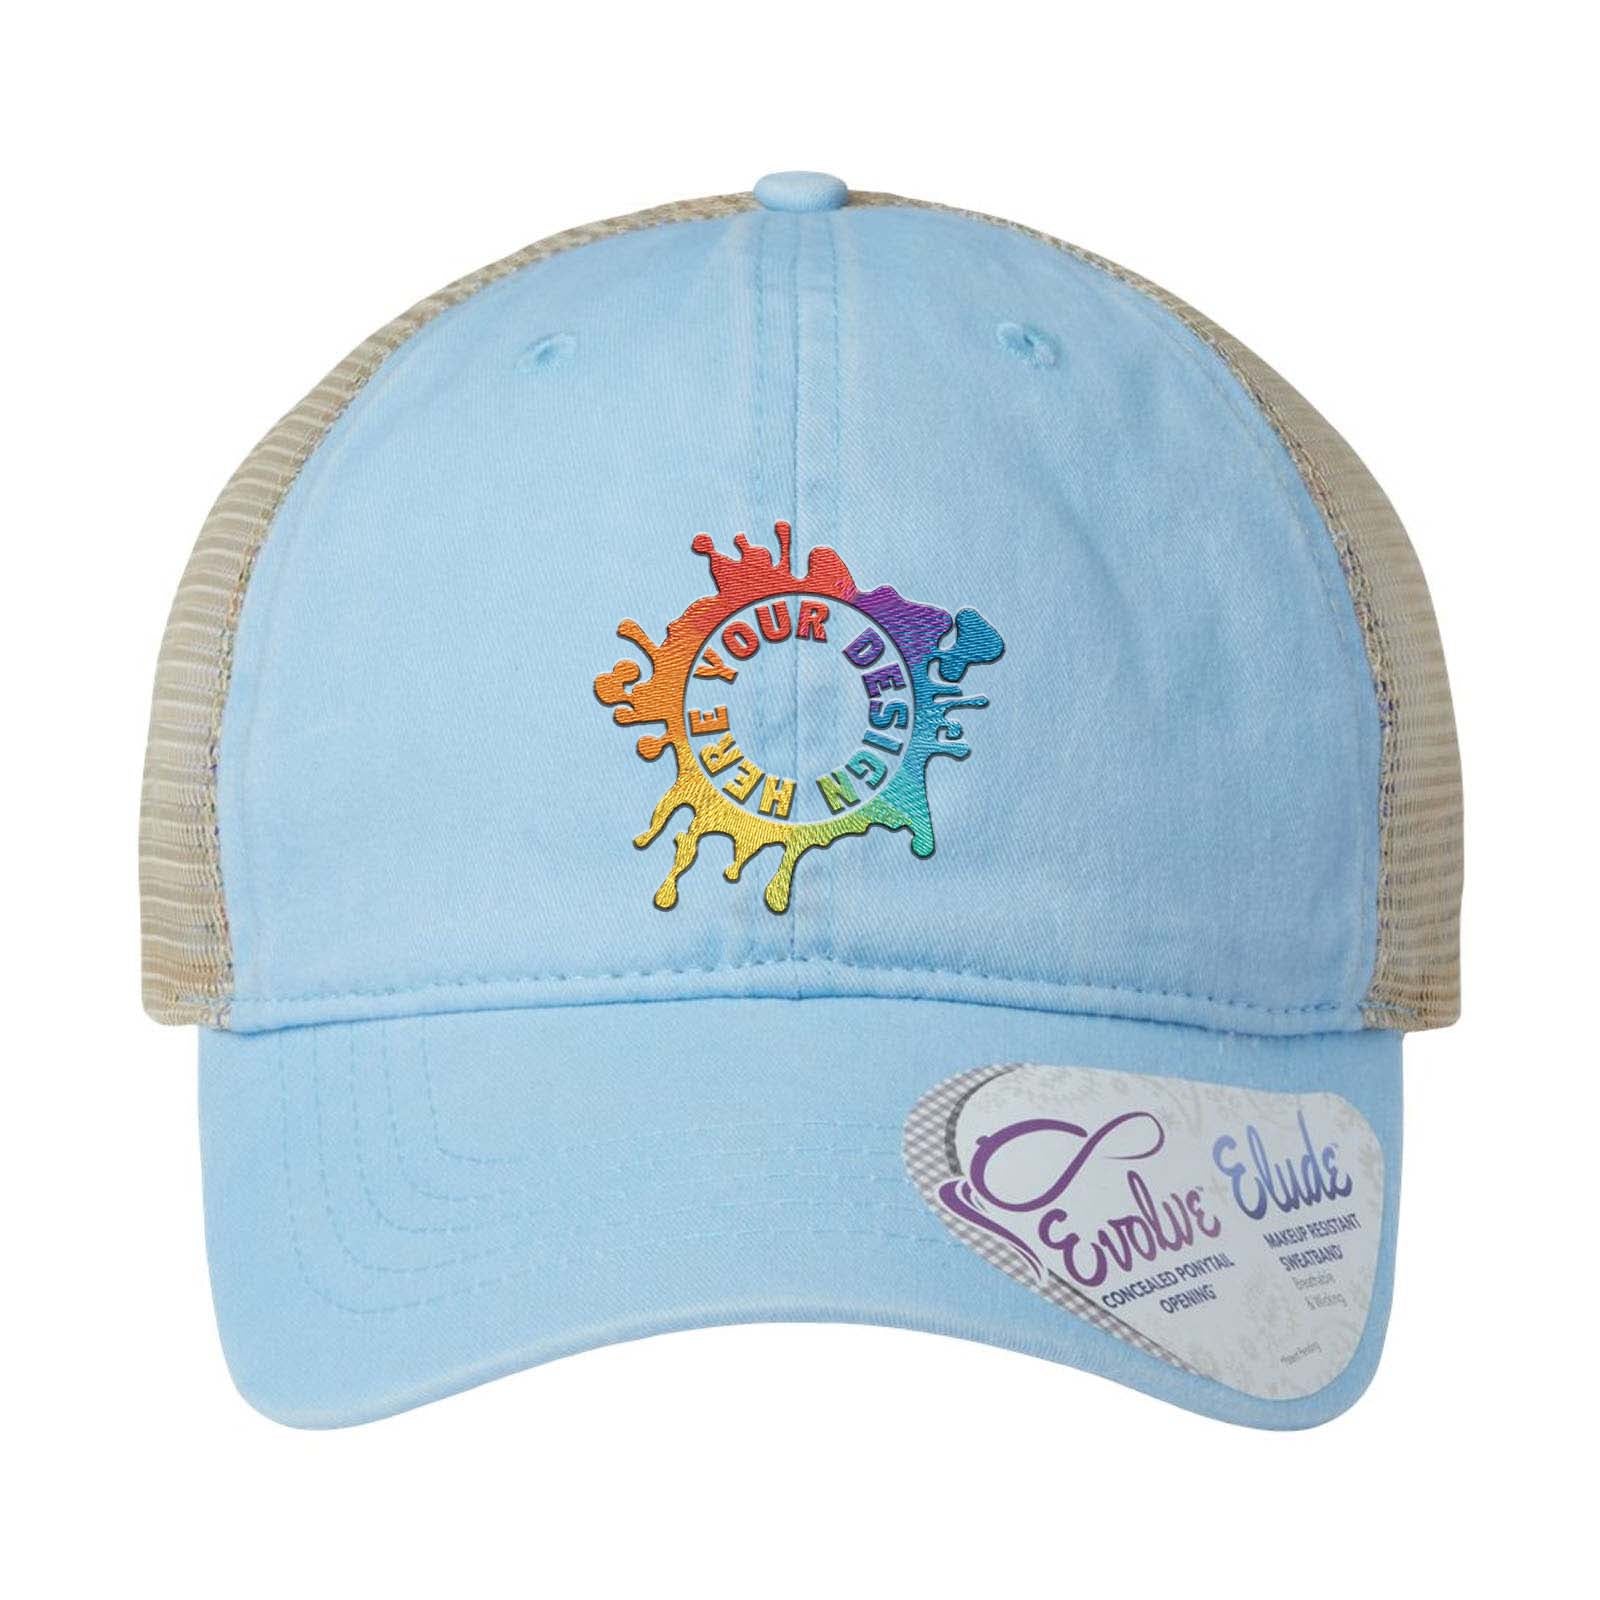 Embroidered Infinity Her - Women's Washed Mesh Back Cap - Mato & Hash